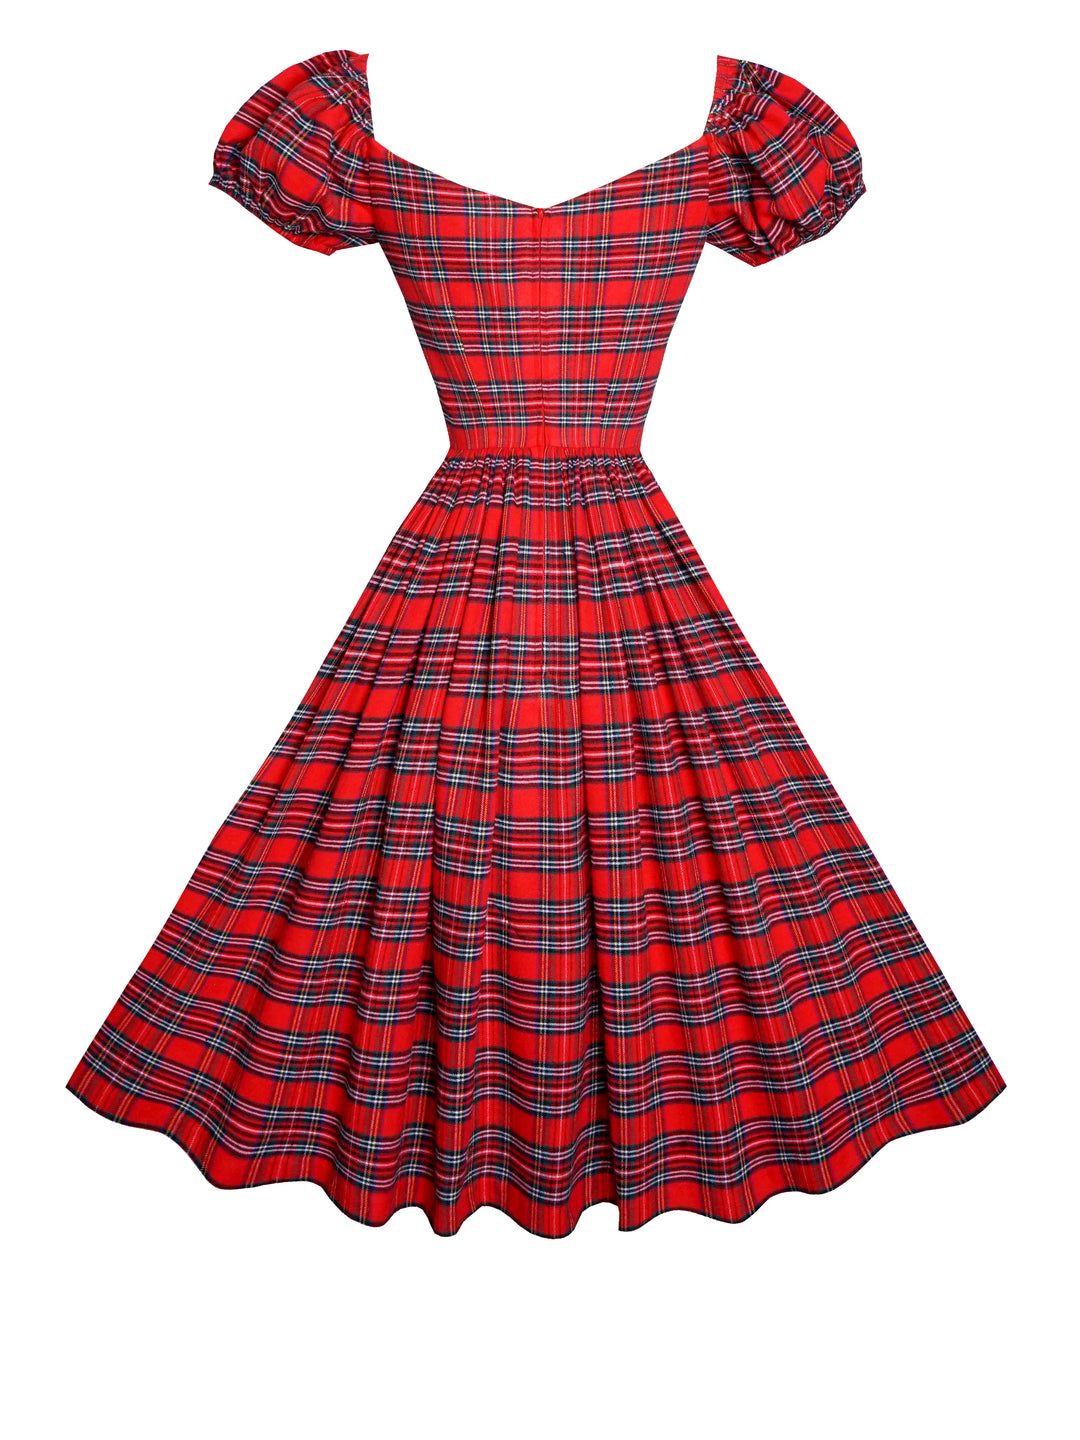 MTO - Margaret Dress in "Christmas Gone Plaid"